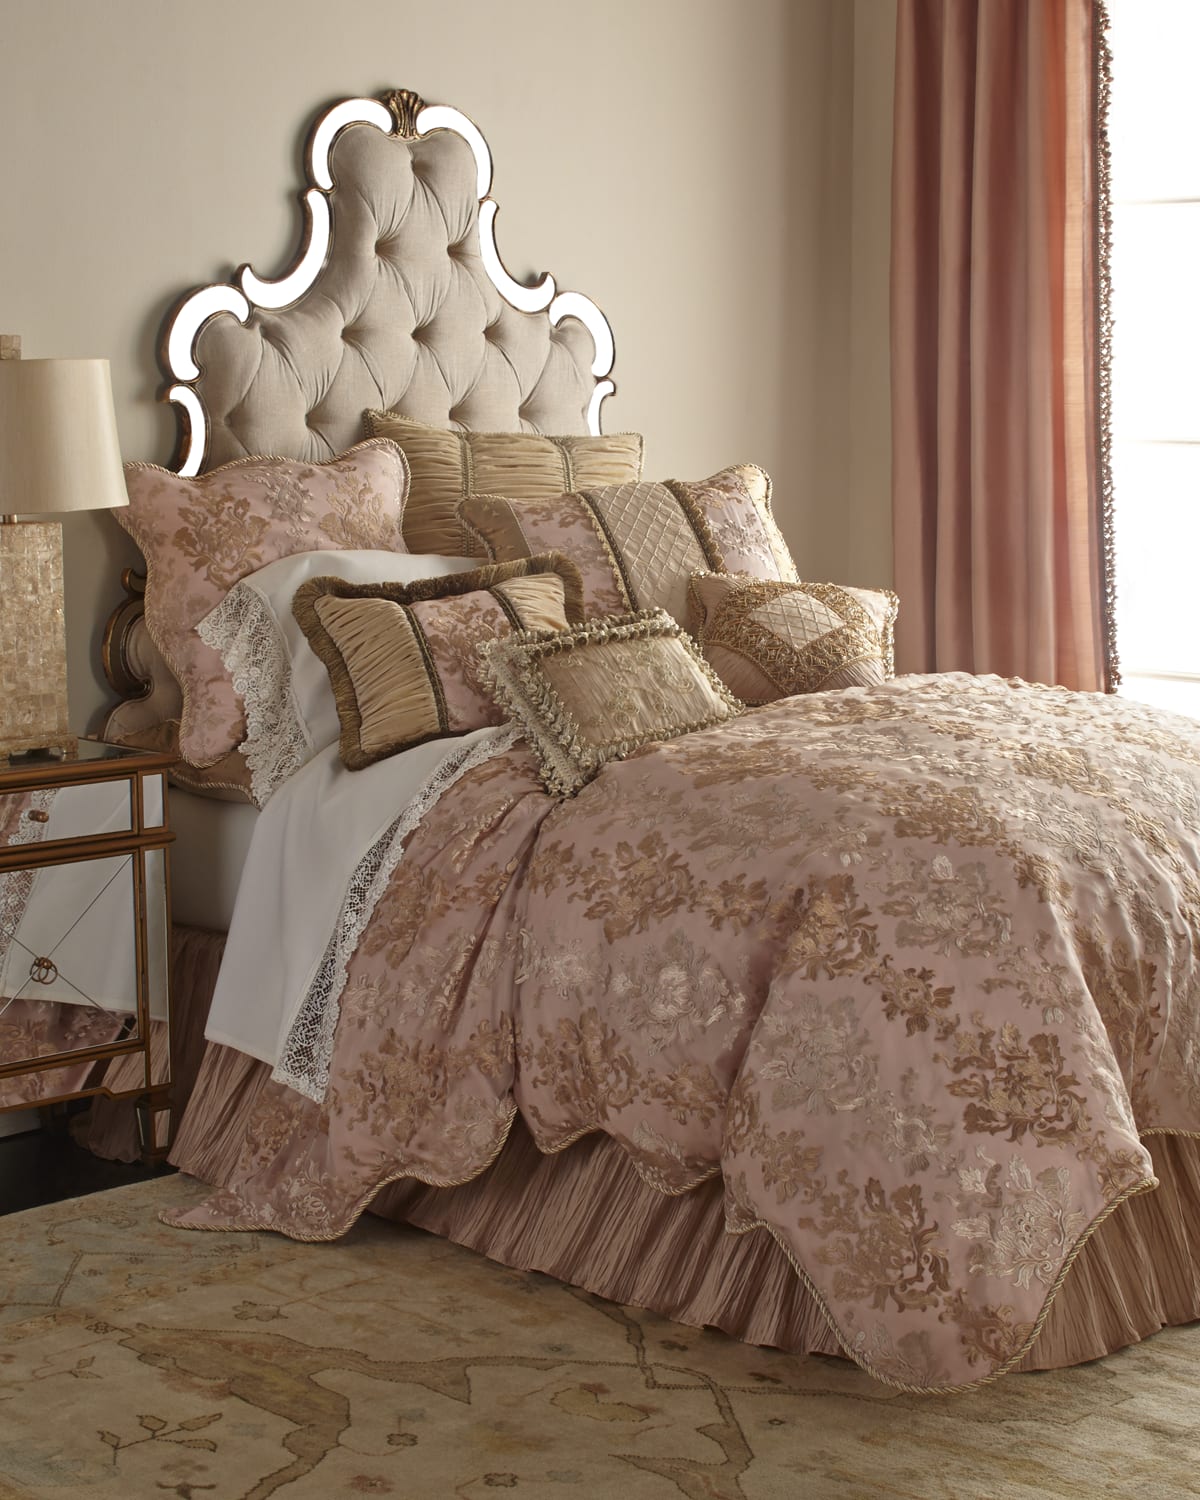 Image Sweet Dreams Queen Alessandra Scalloped Damask Duvet Cover